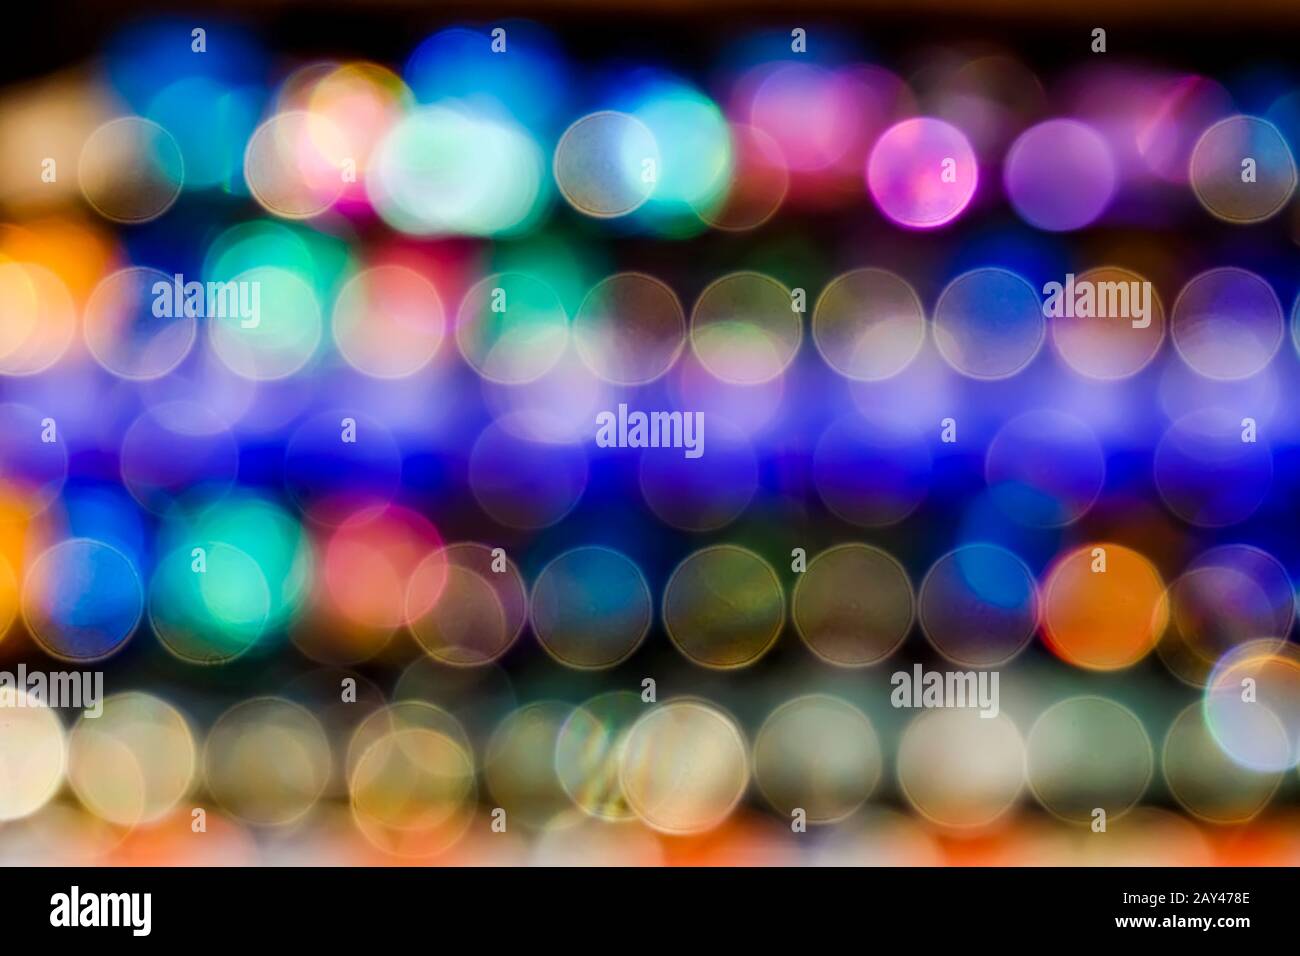 Abstract  out of focus light pattern. Stock Photo